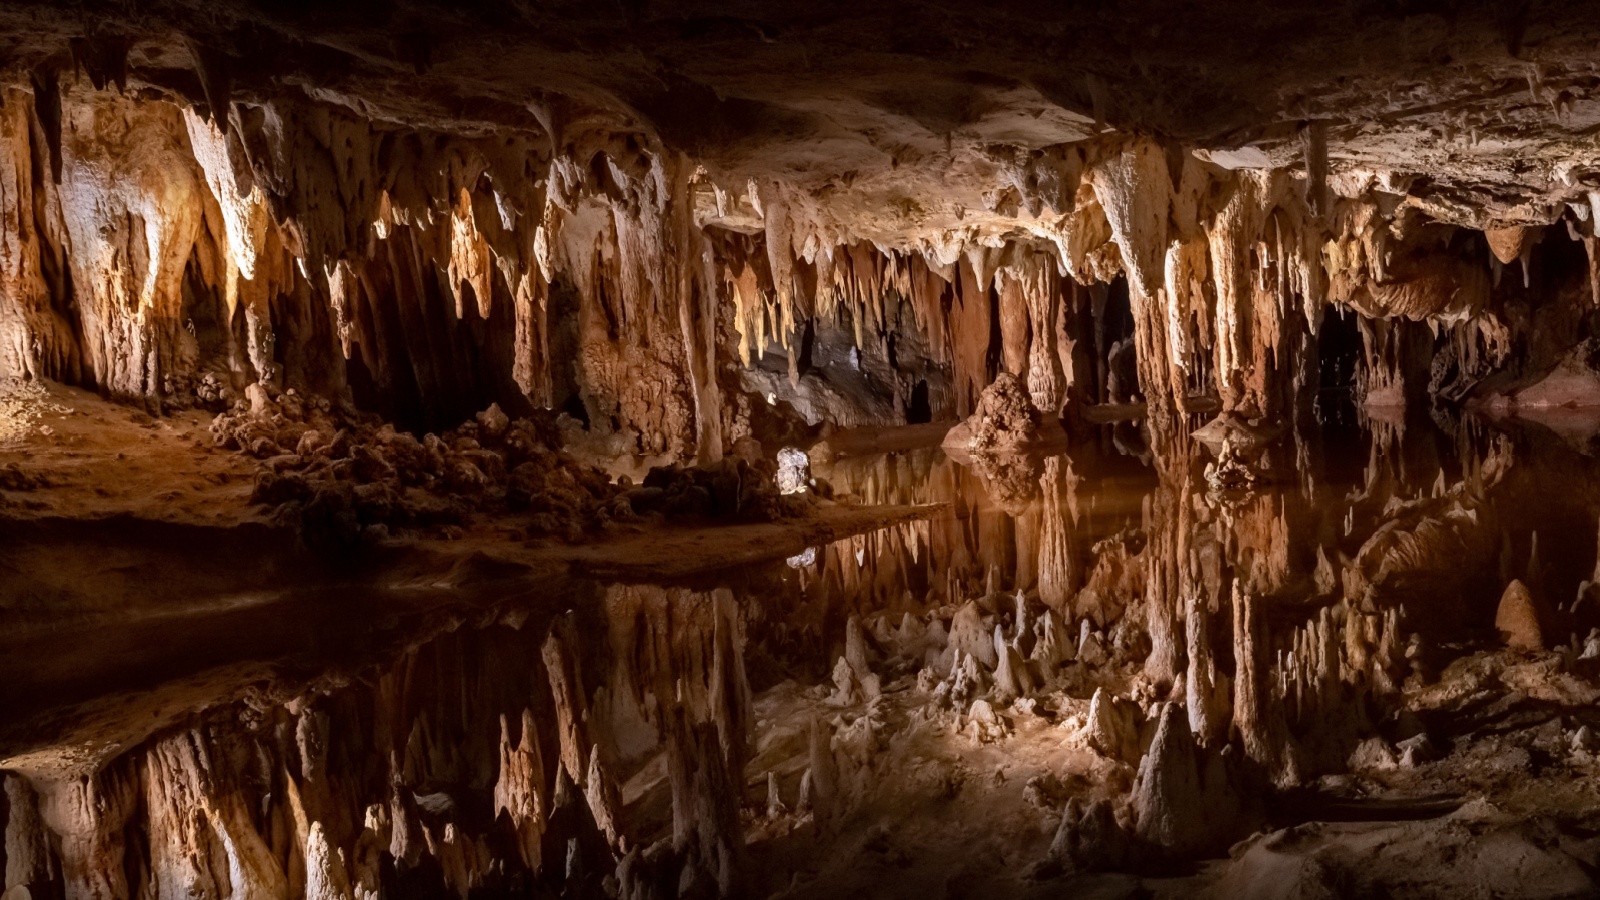 image credit: Belikova Oksana/Shutterstock <p>Rickwood Caverns State Park features stunning underground formations that are millions of years old. The guided cave tours showcase stalactites, stalagmites, and an underground pool, providing a fascinating glimpse into the subterranean world. Above ground, the park offers hiking trails, a playground, and a swimming pool.</p>